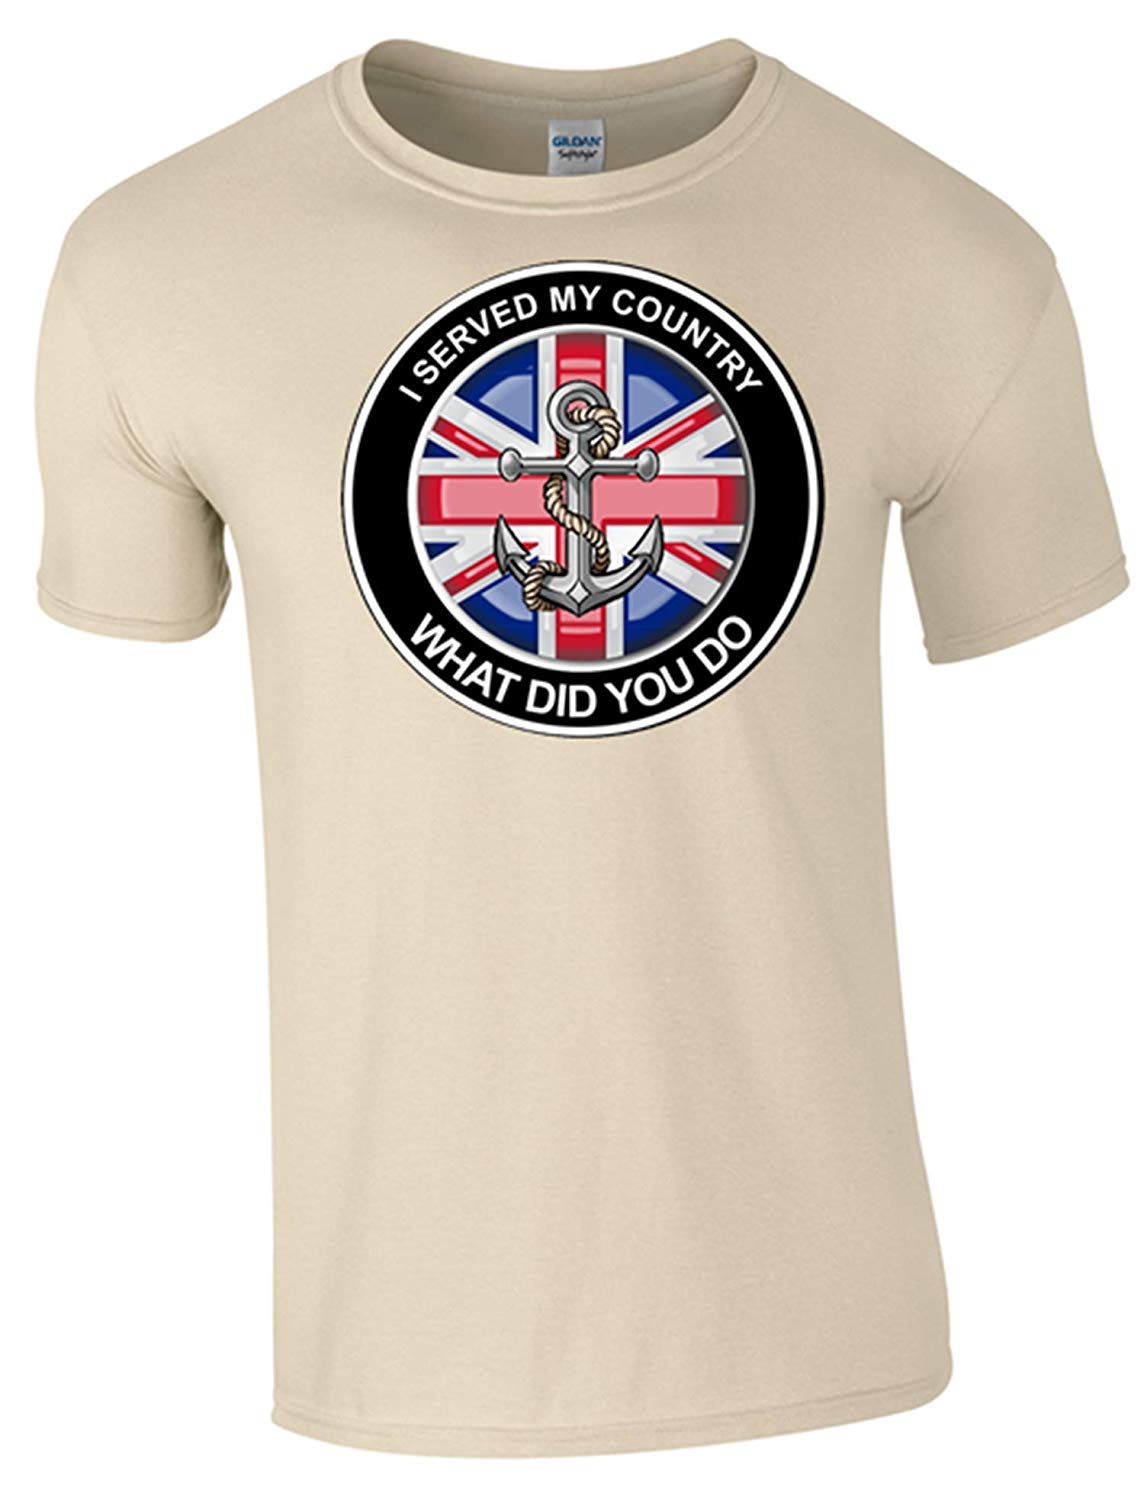 Navy What did You do T-Shirt - Army 1157 Kit  Veterans Owned Business